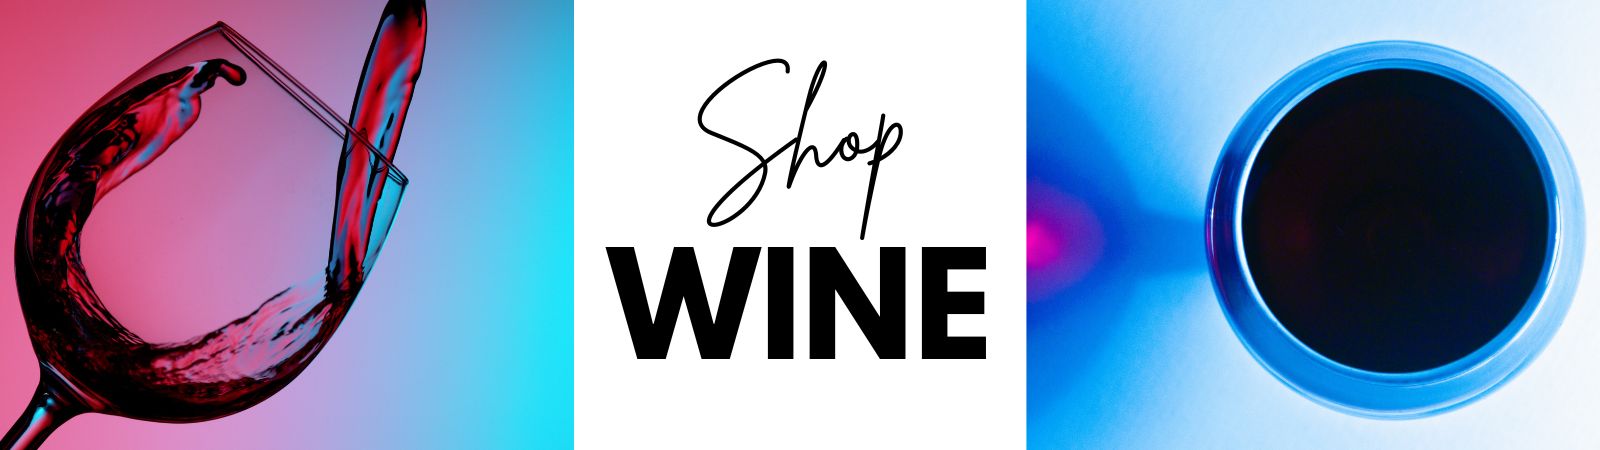 SHOP ALL WINES